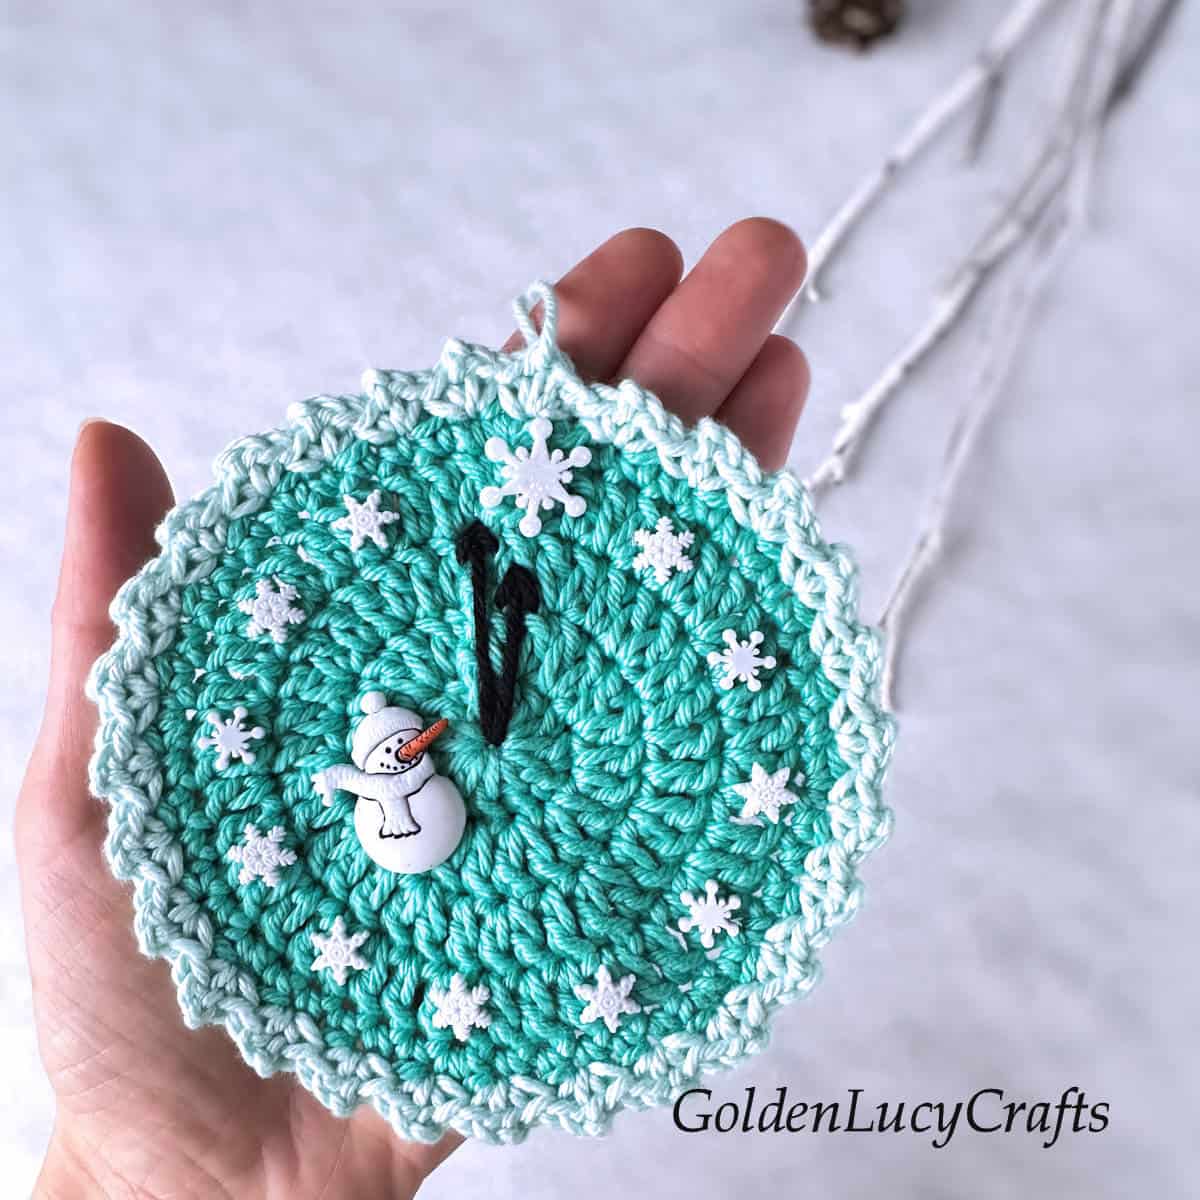 Crochet round ornament in the palm of a hand.